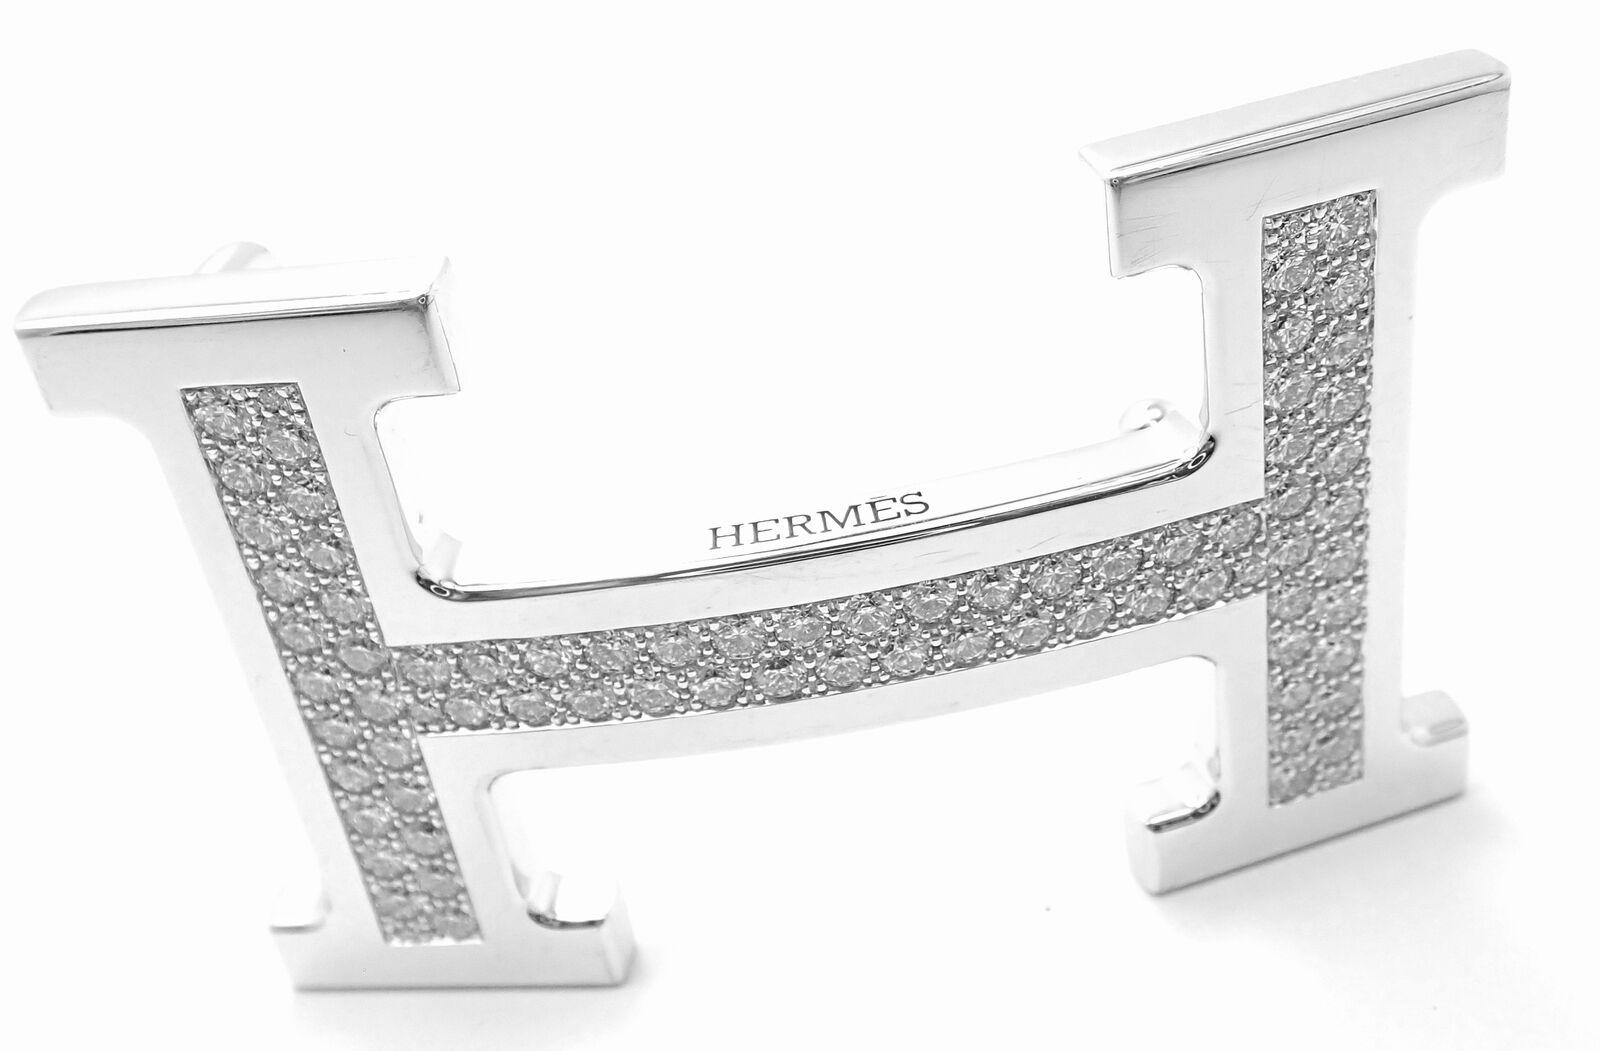 18k White Gold Large 3.79ct Diamond Belt Buckle With Reversible Belt by Hermes. 
With 77 Round brilliant cut diamonds VVS1 clarity, E color total weight 3.79ct
Details: 
Size:  Buckle: 61mm (2.4